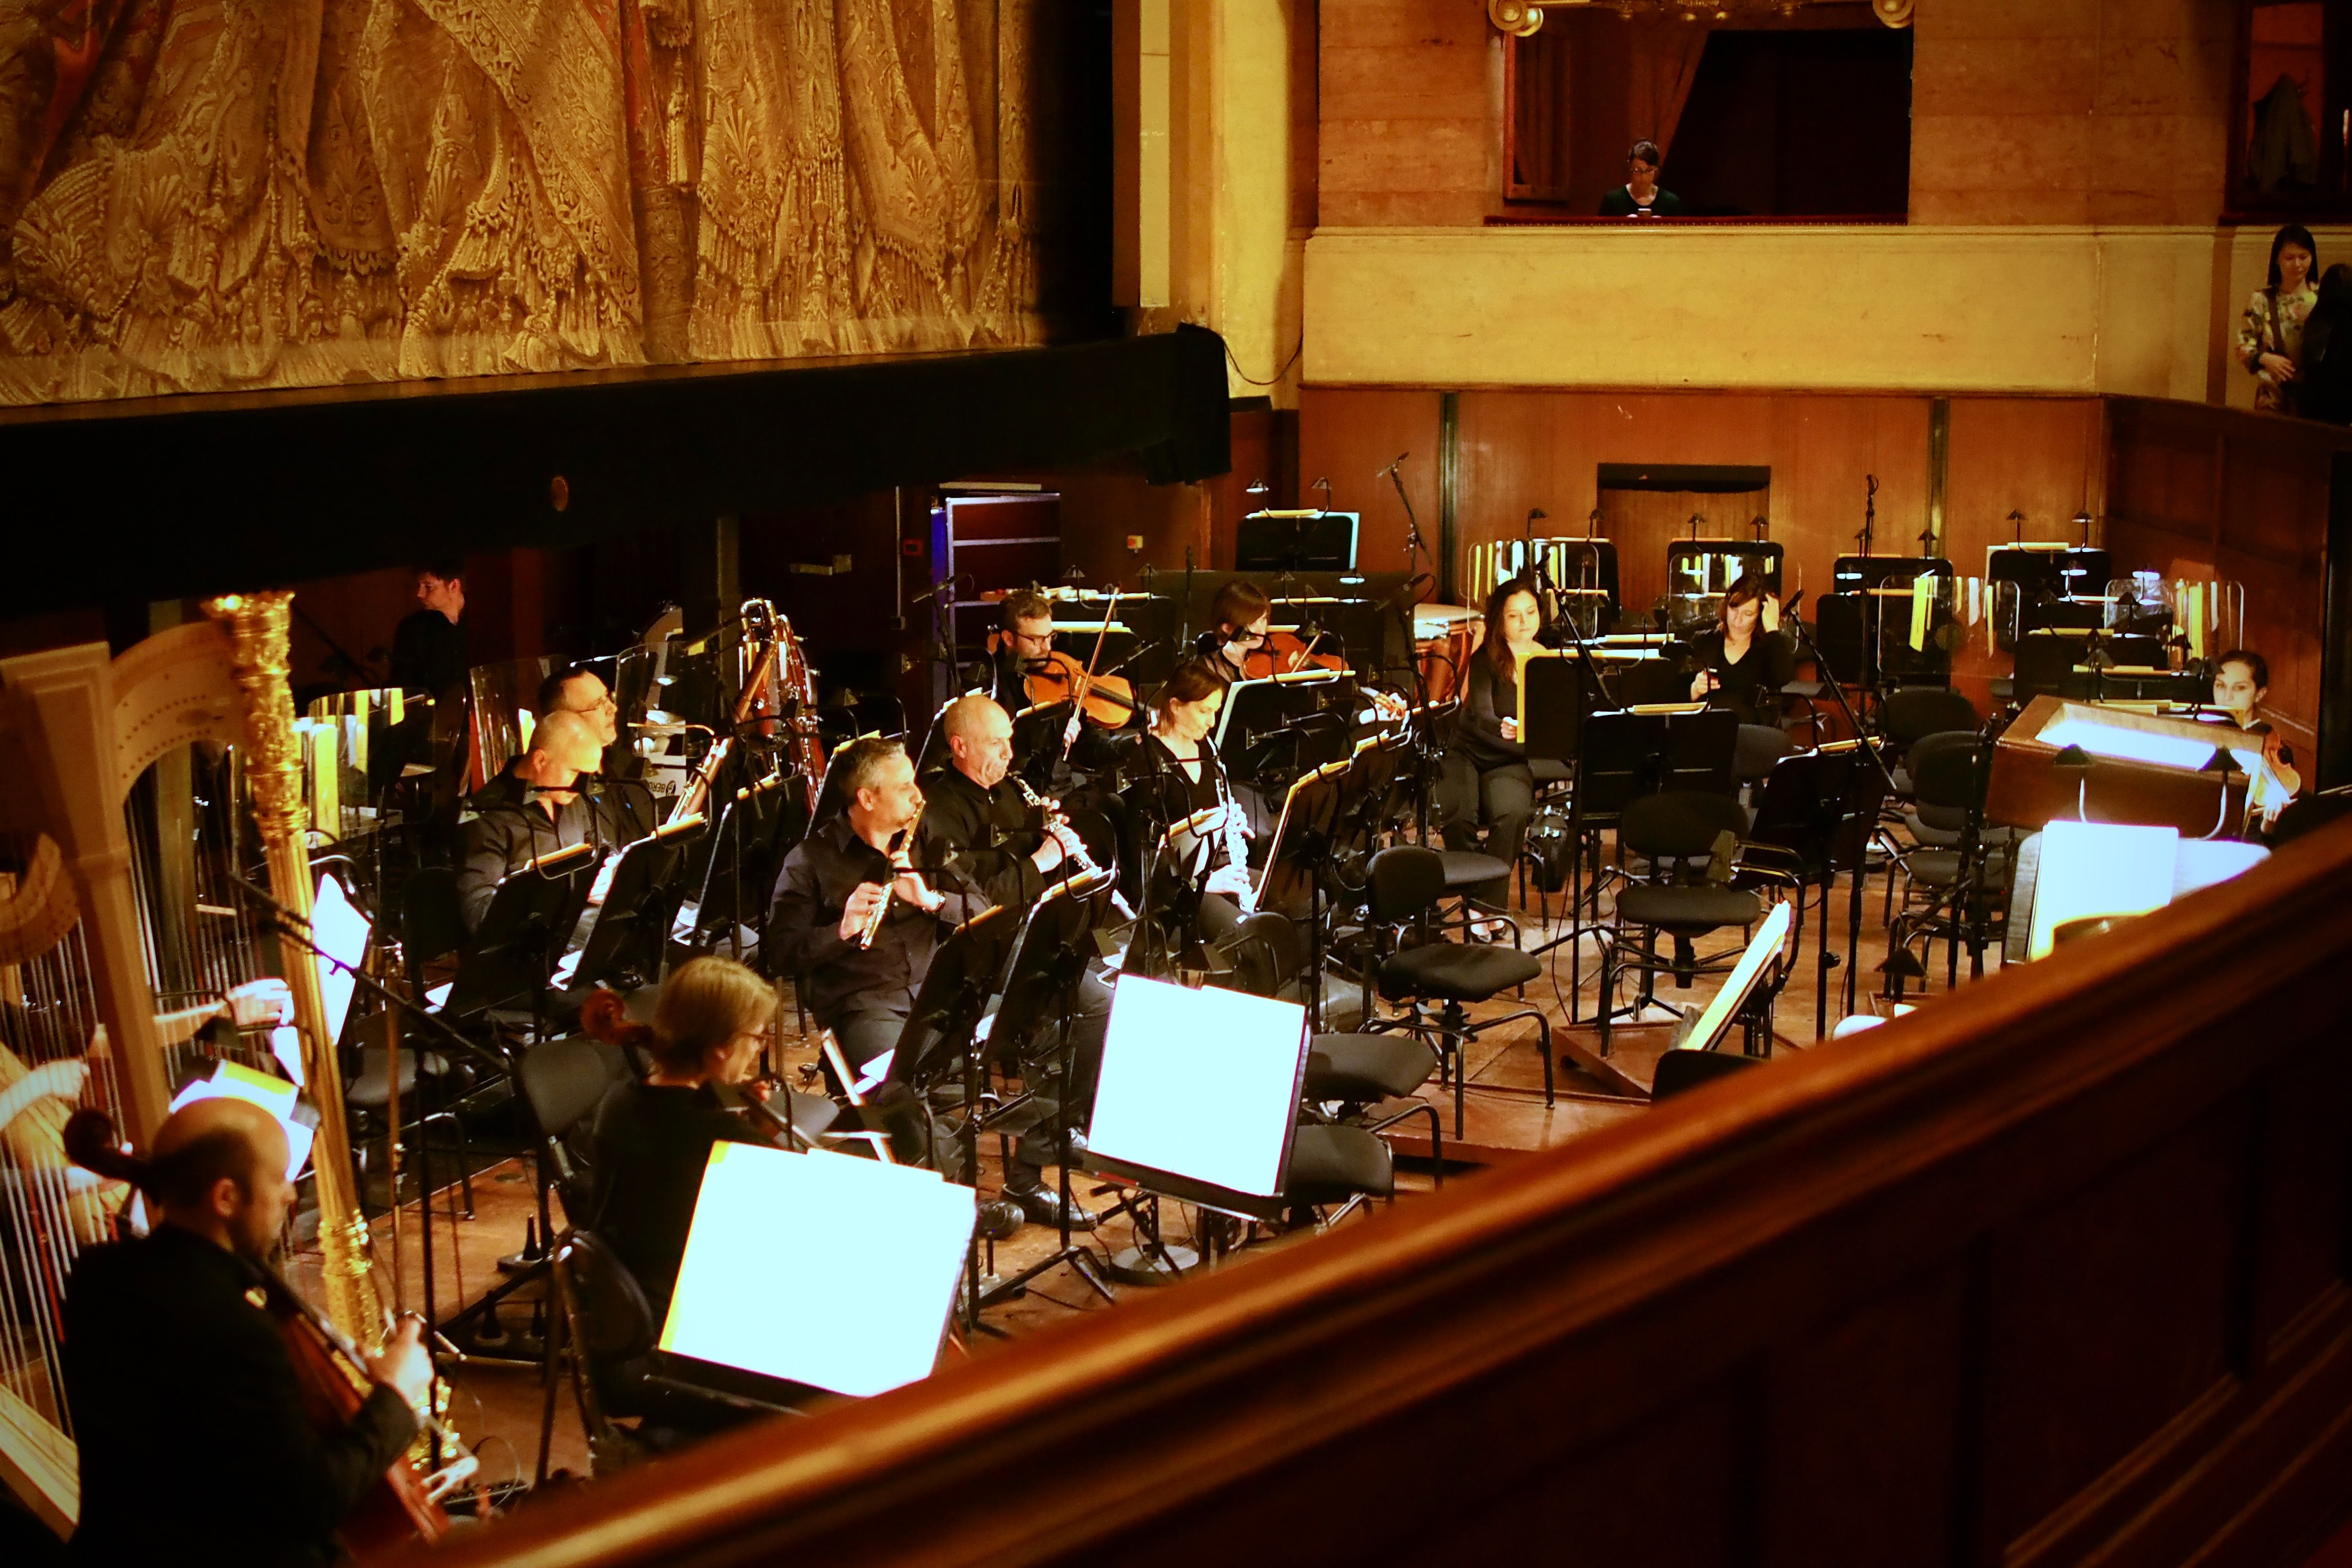 Orchestra in the pit of a theater.